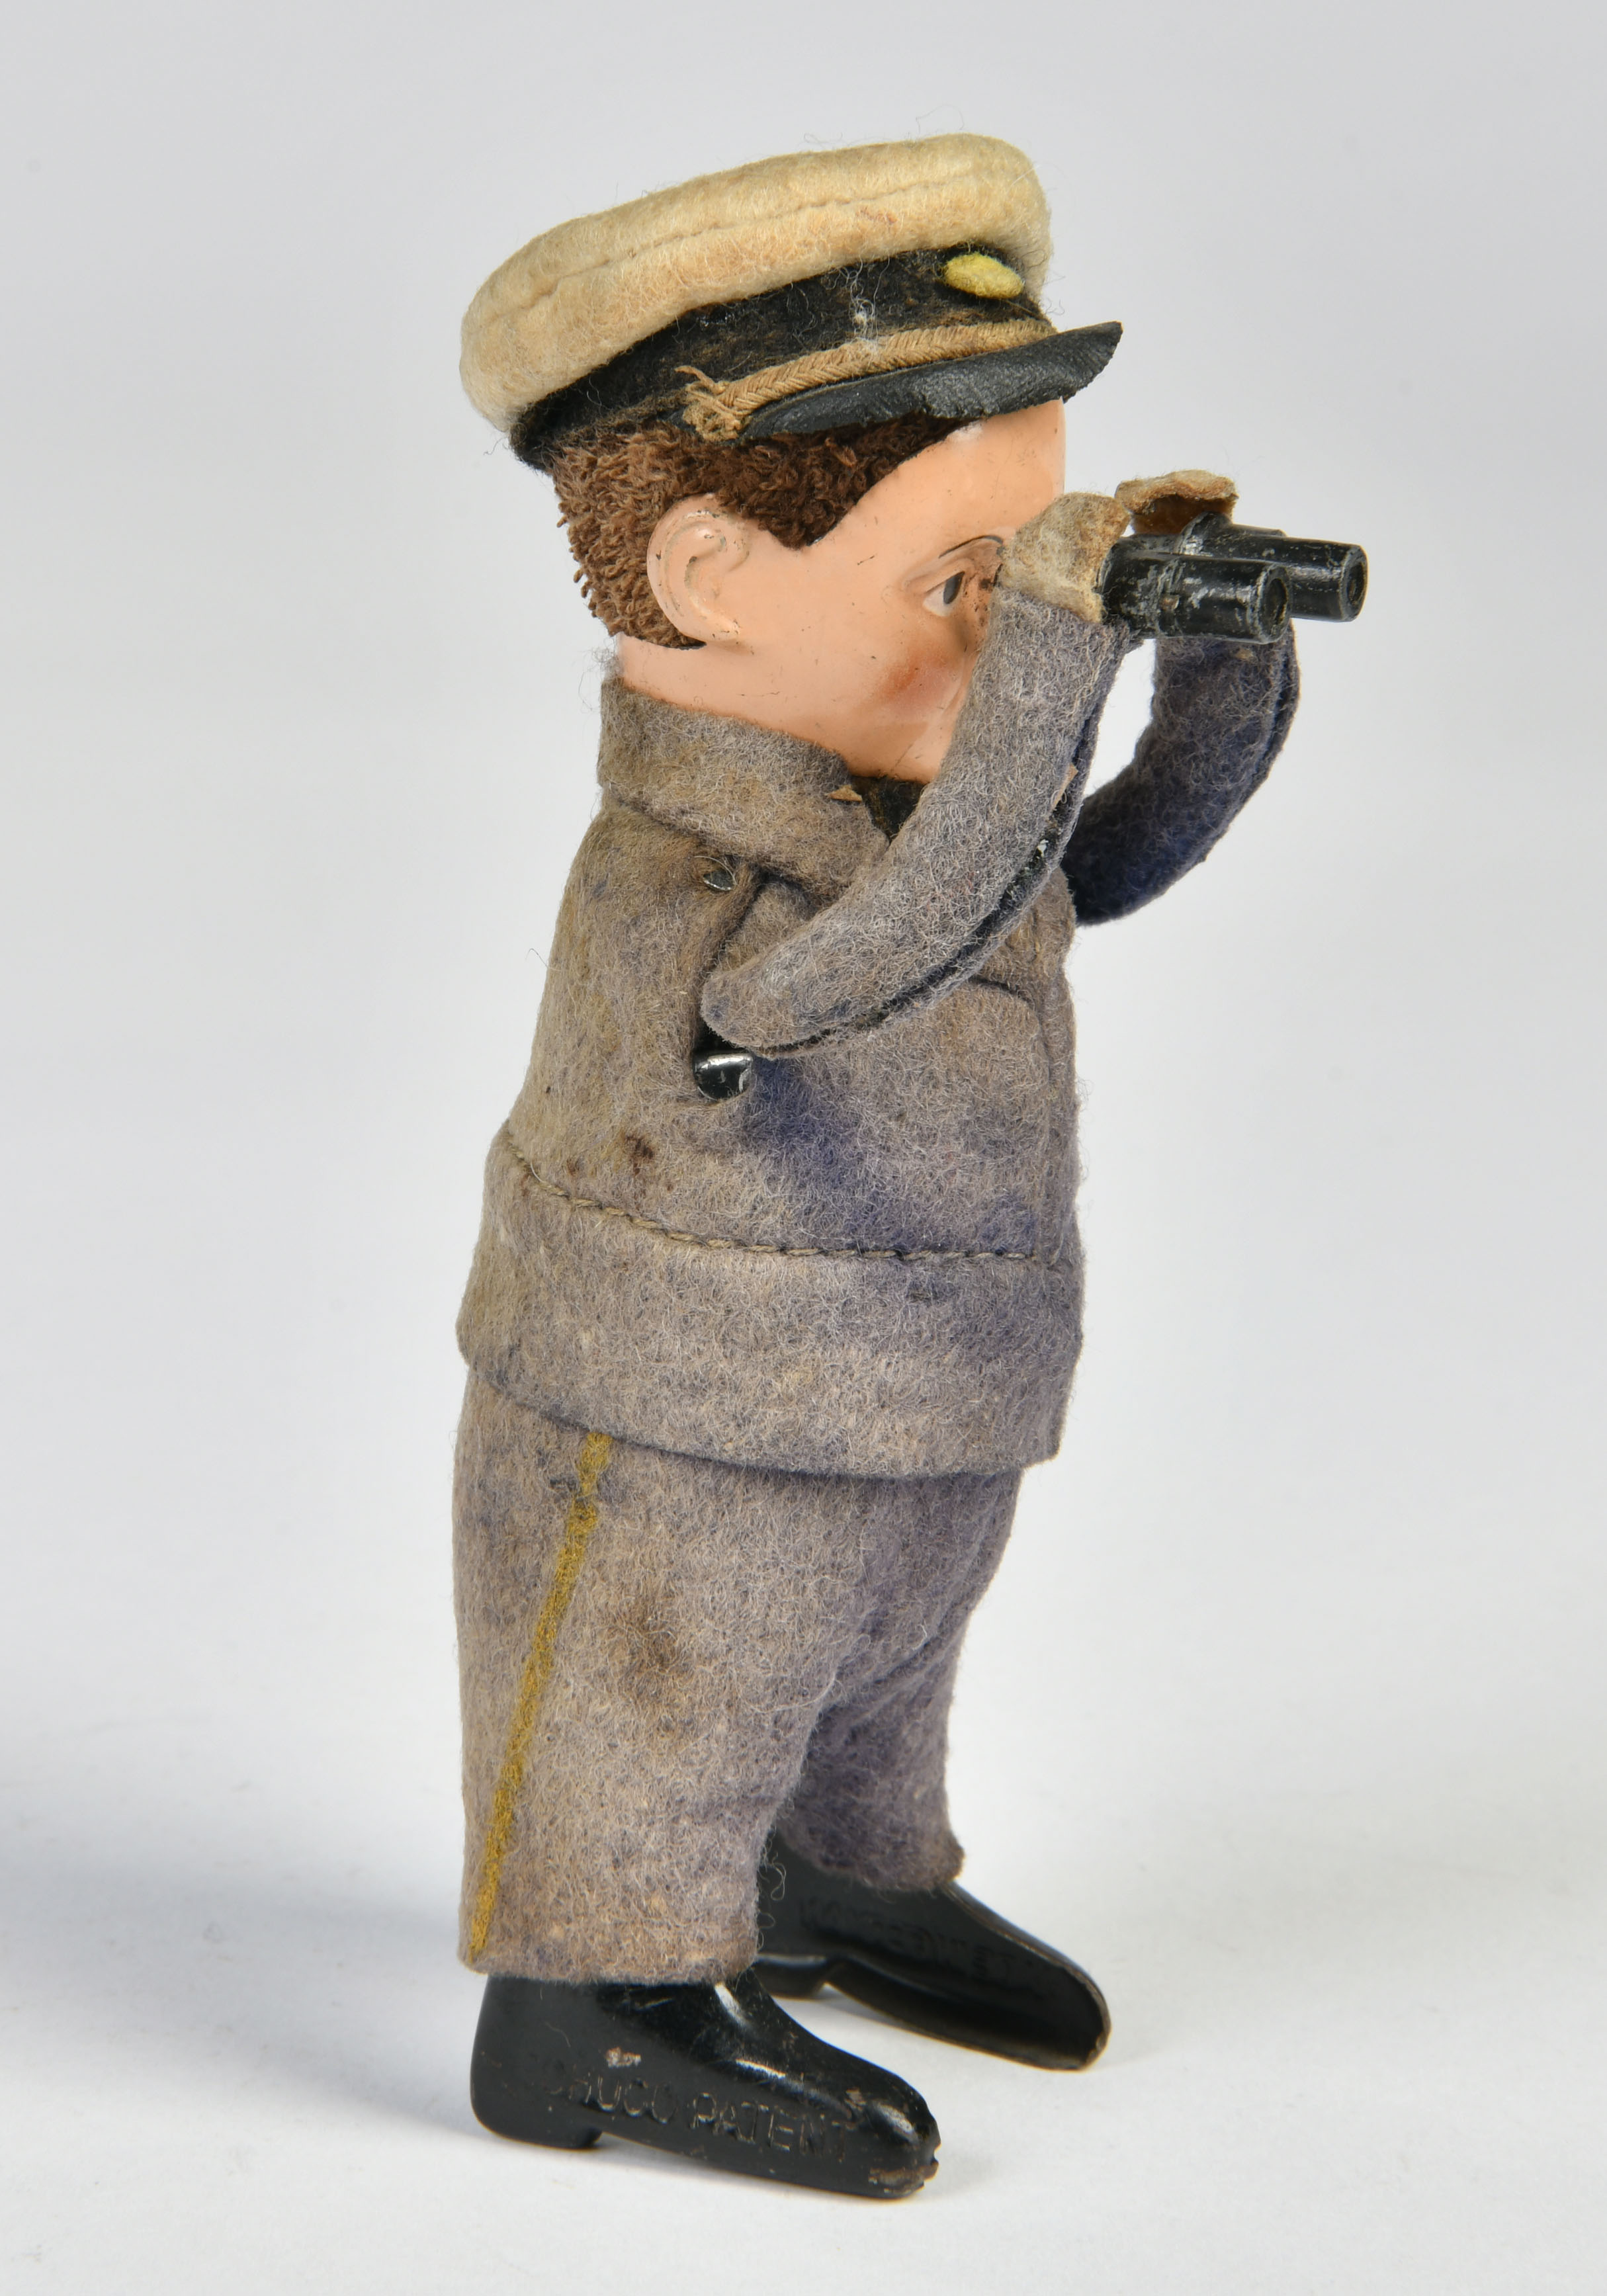 Schuco, captain with binoculars, Germany, cw ok, 13,5 cm, clothes dusty, C 2-